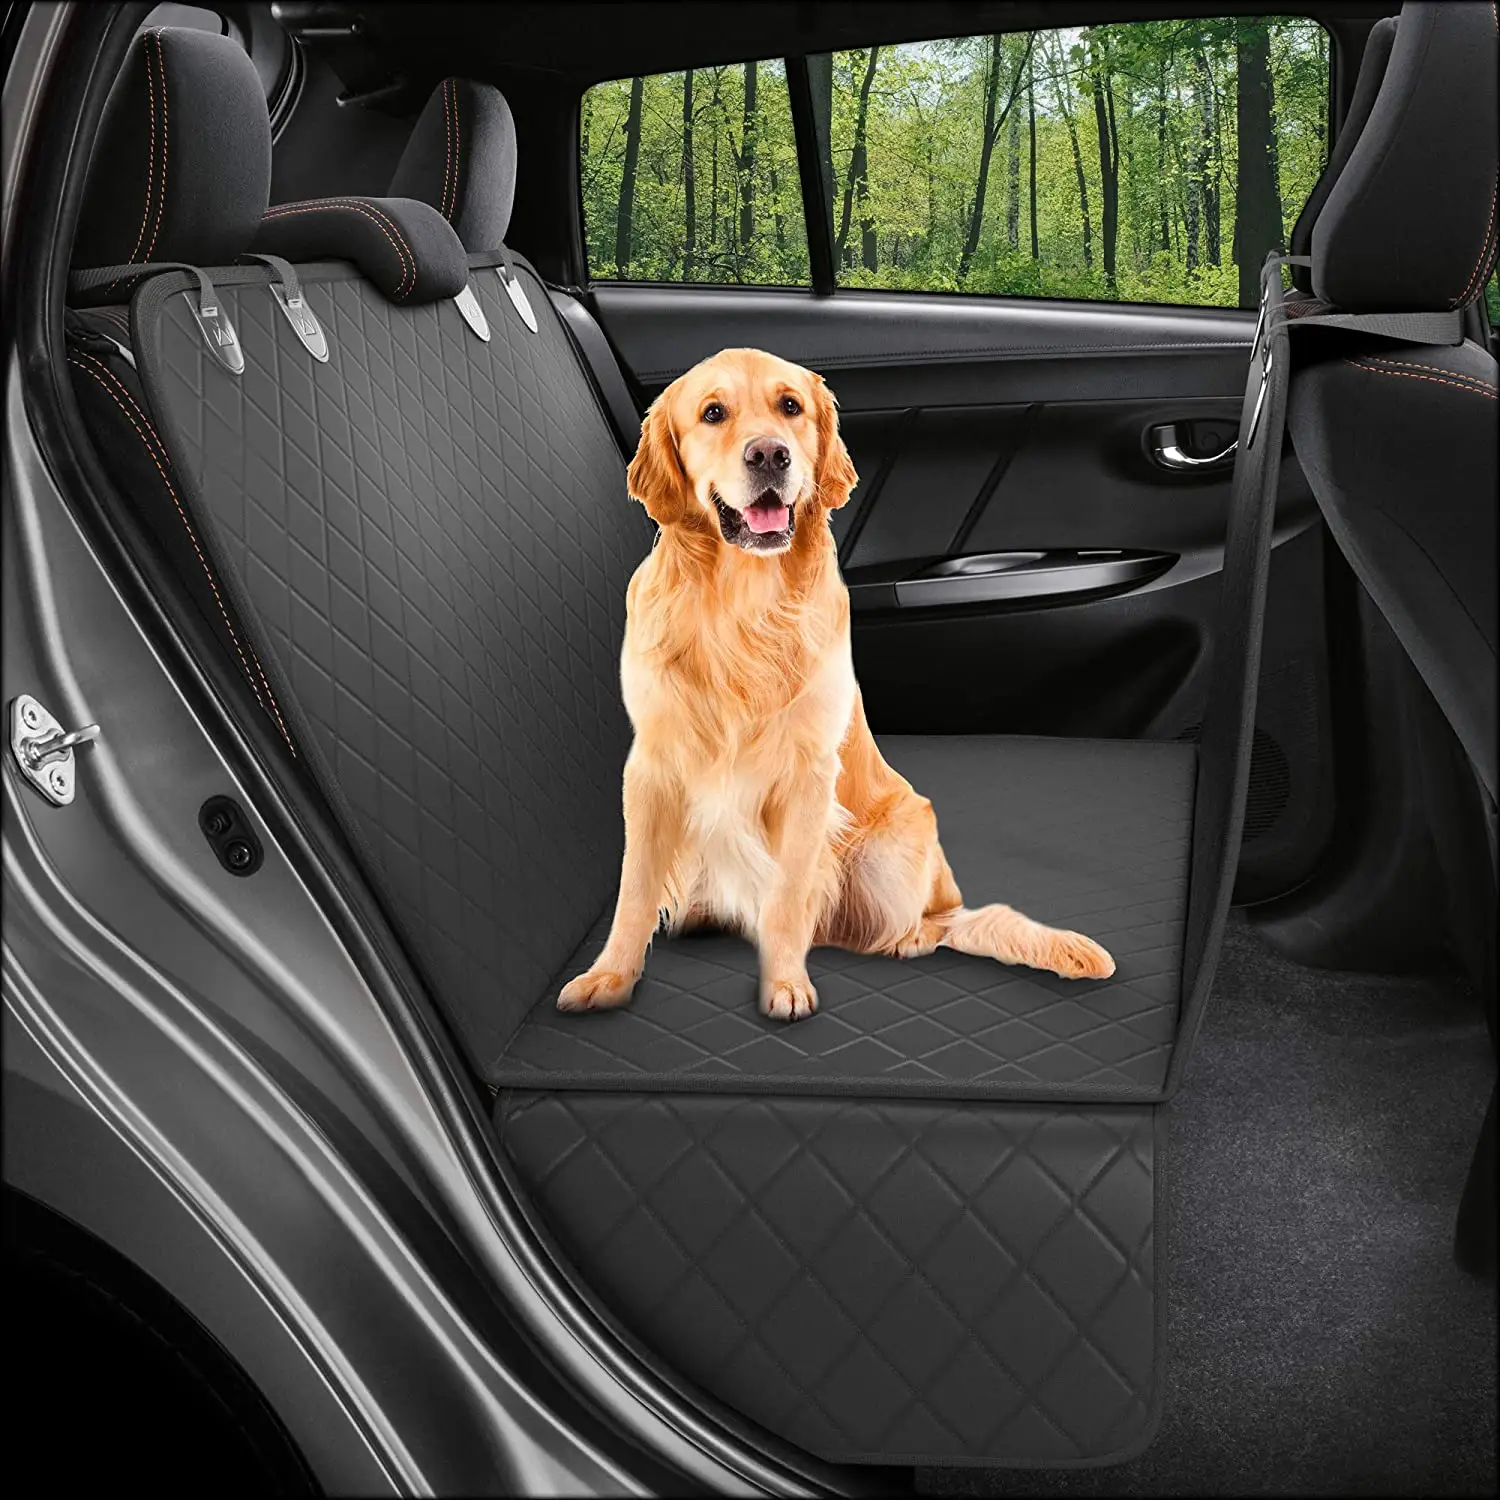 100% Waterproof Black Universal dog seat cover car for dogs and cats